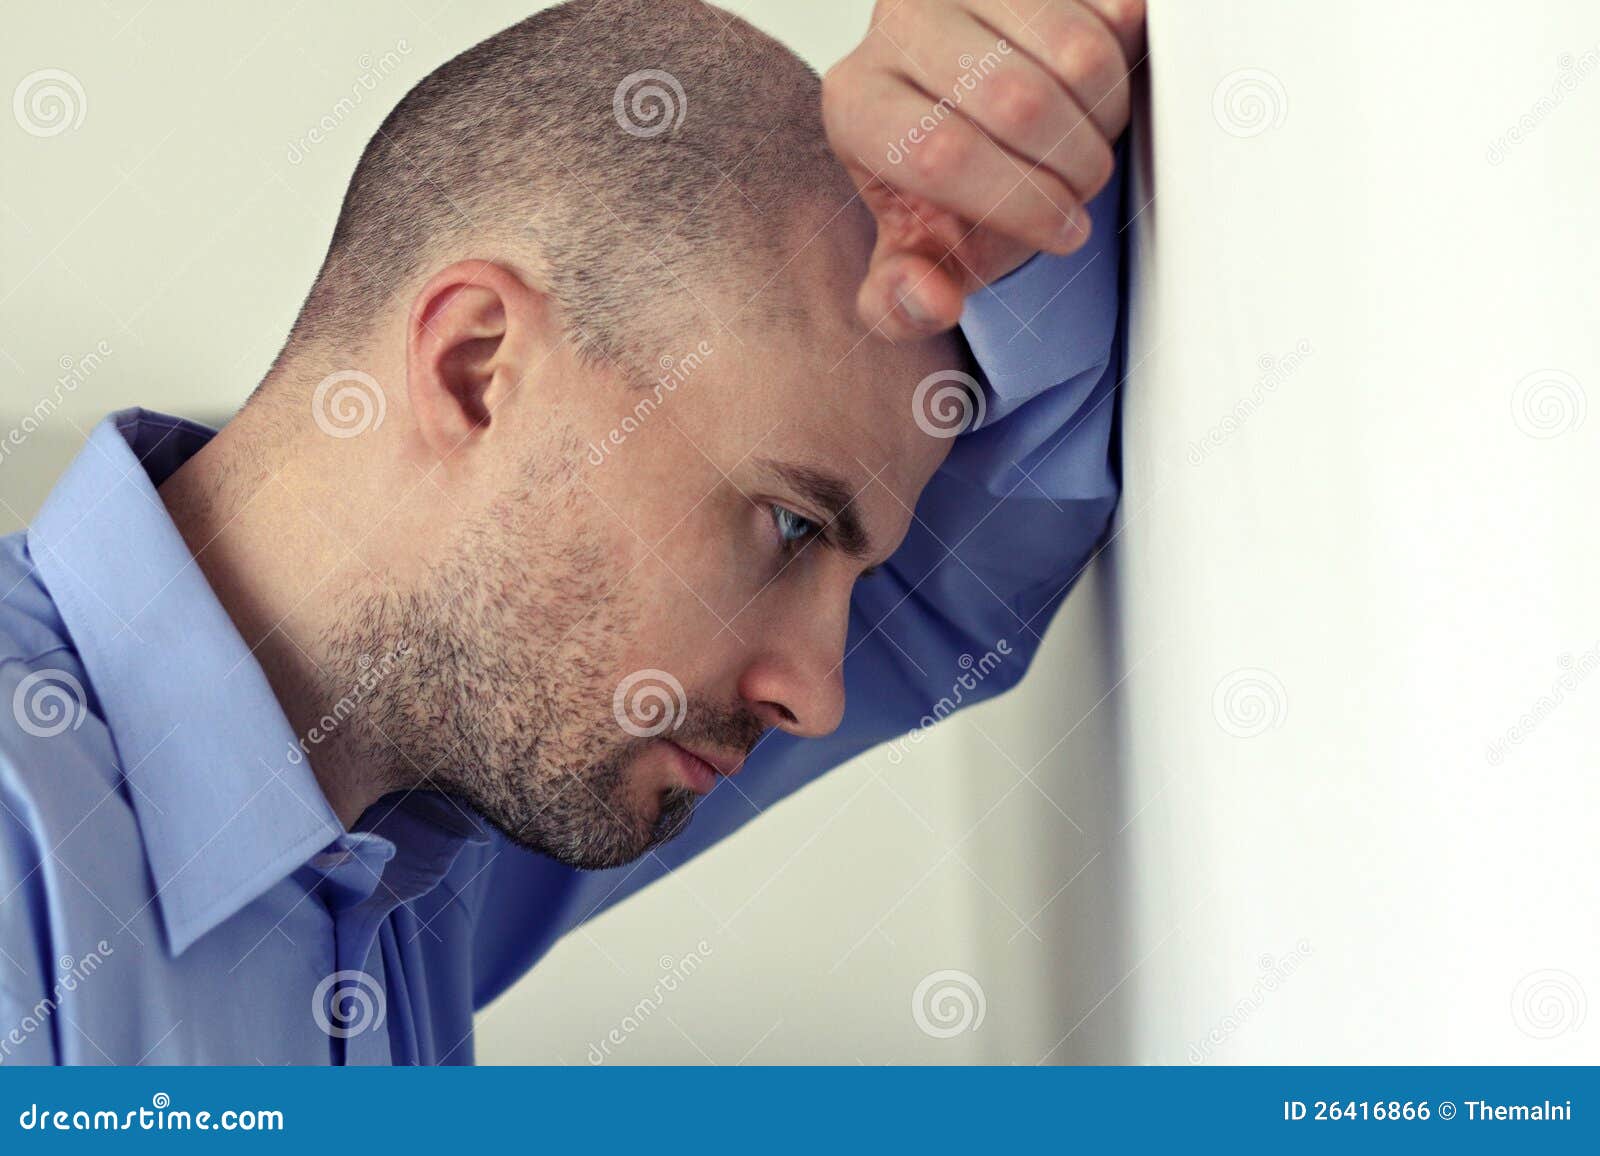 Concerned Man Royalty Free Stock Image - Image: 26416866